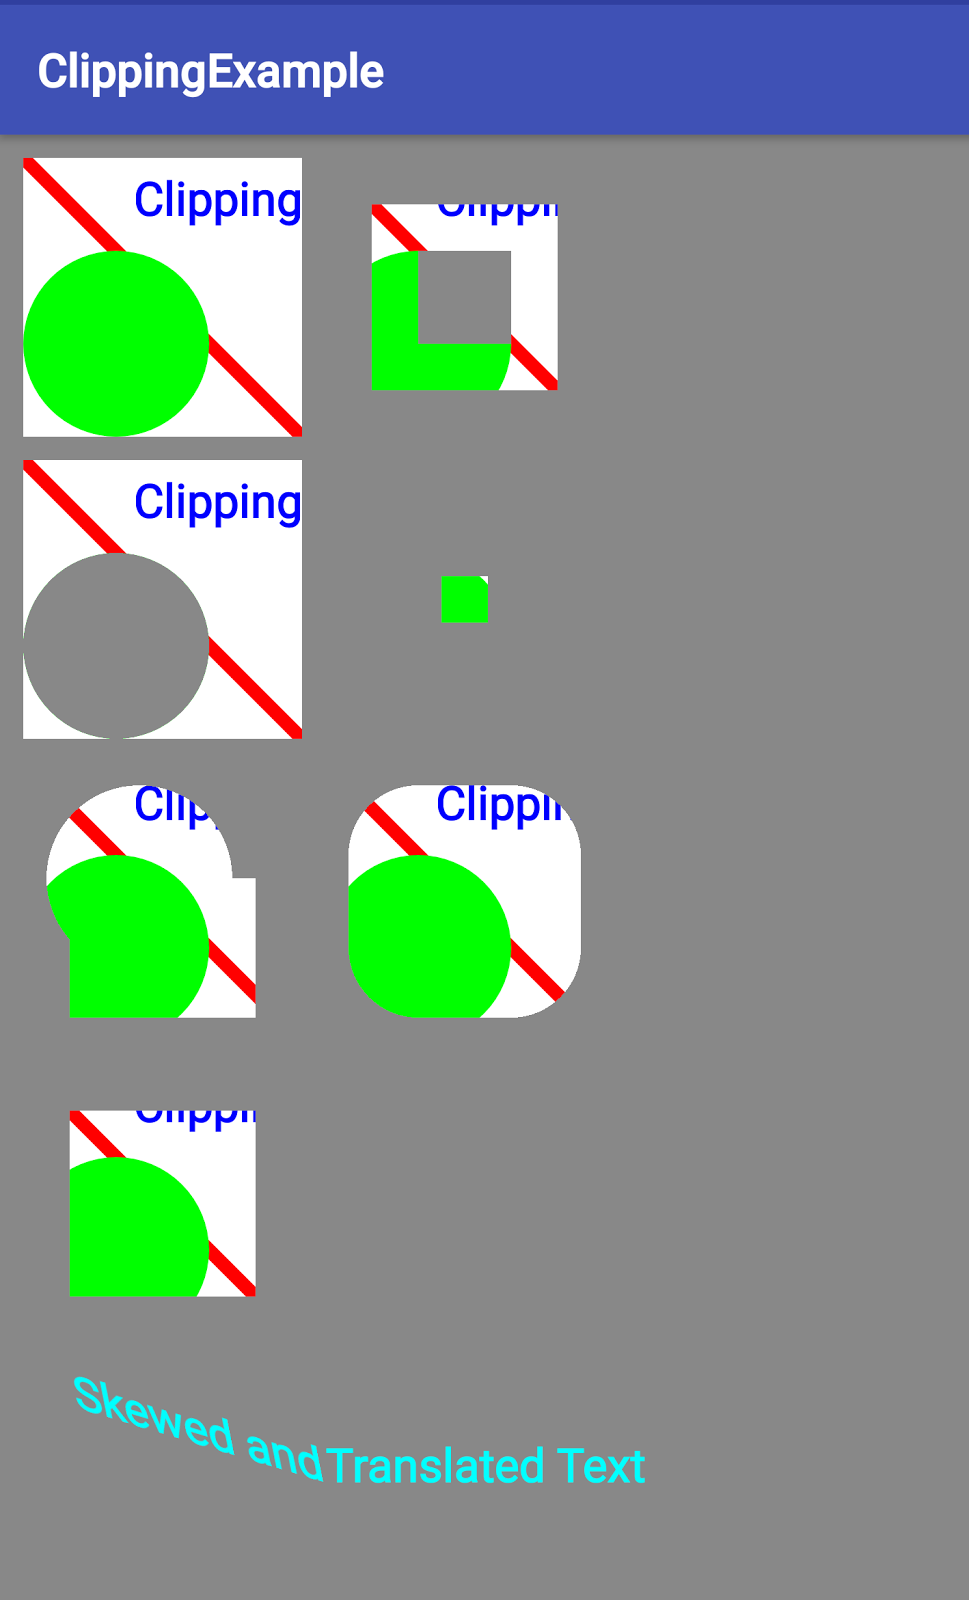  Screenshot for the ClippingExample app